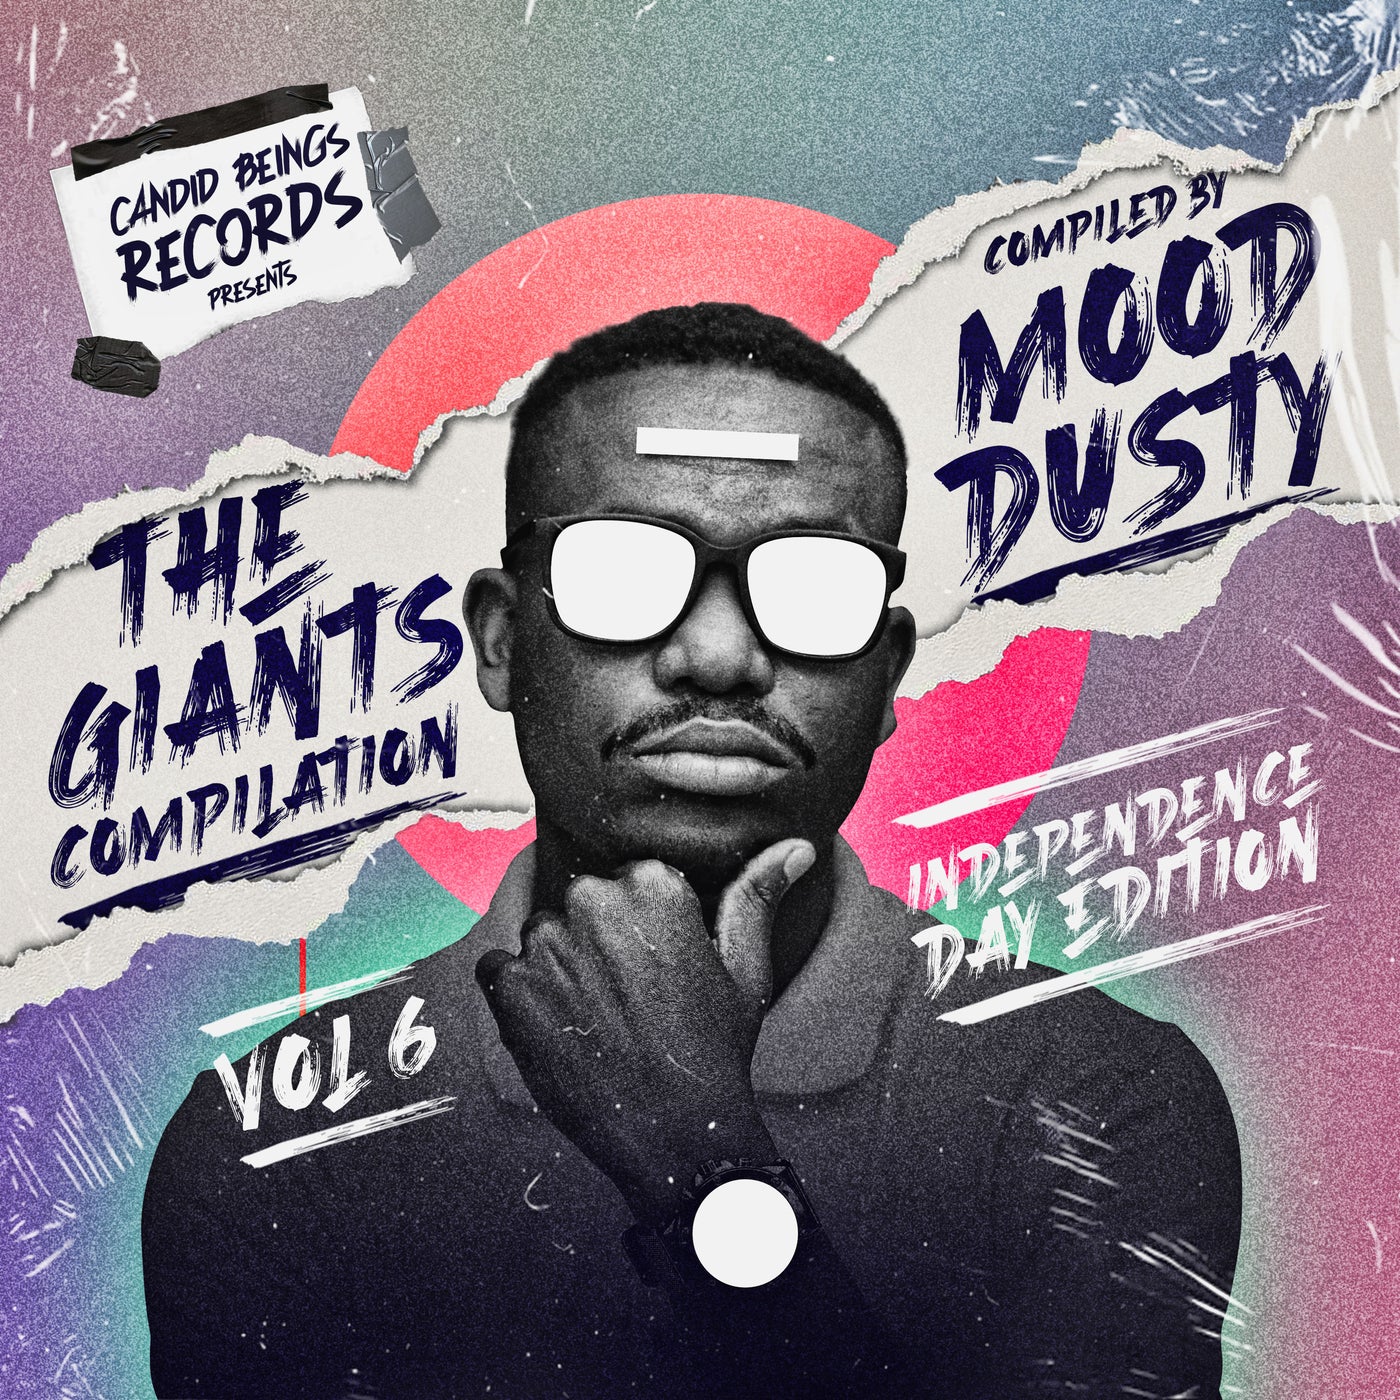 THE GIANTS COMPILATION VOL.6 COMPILED BY MOOD DUSTY (INDEPENDENCE DAY EDITION) [CB176]